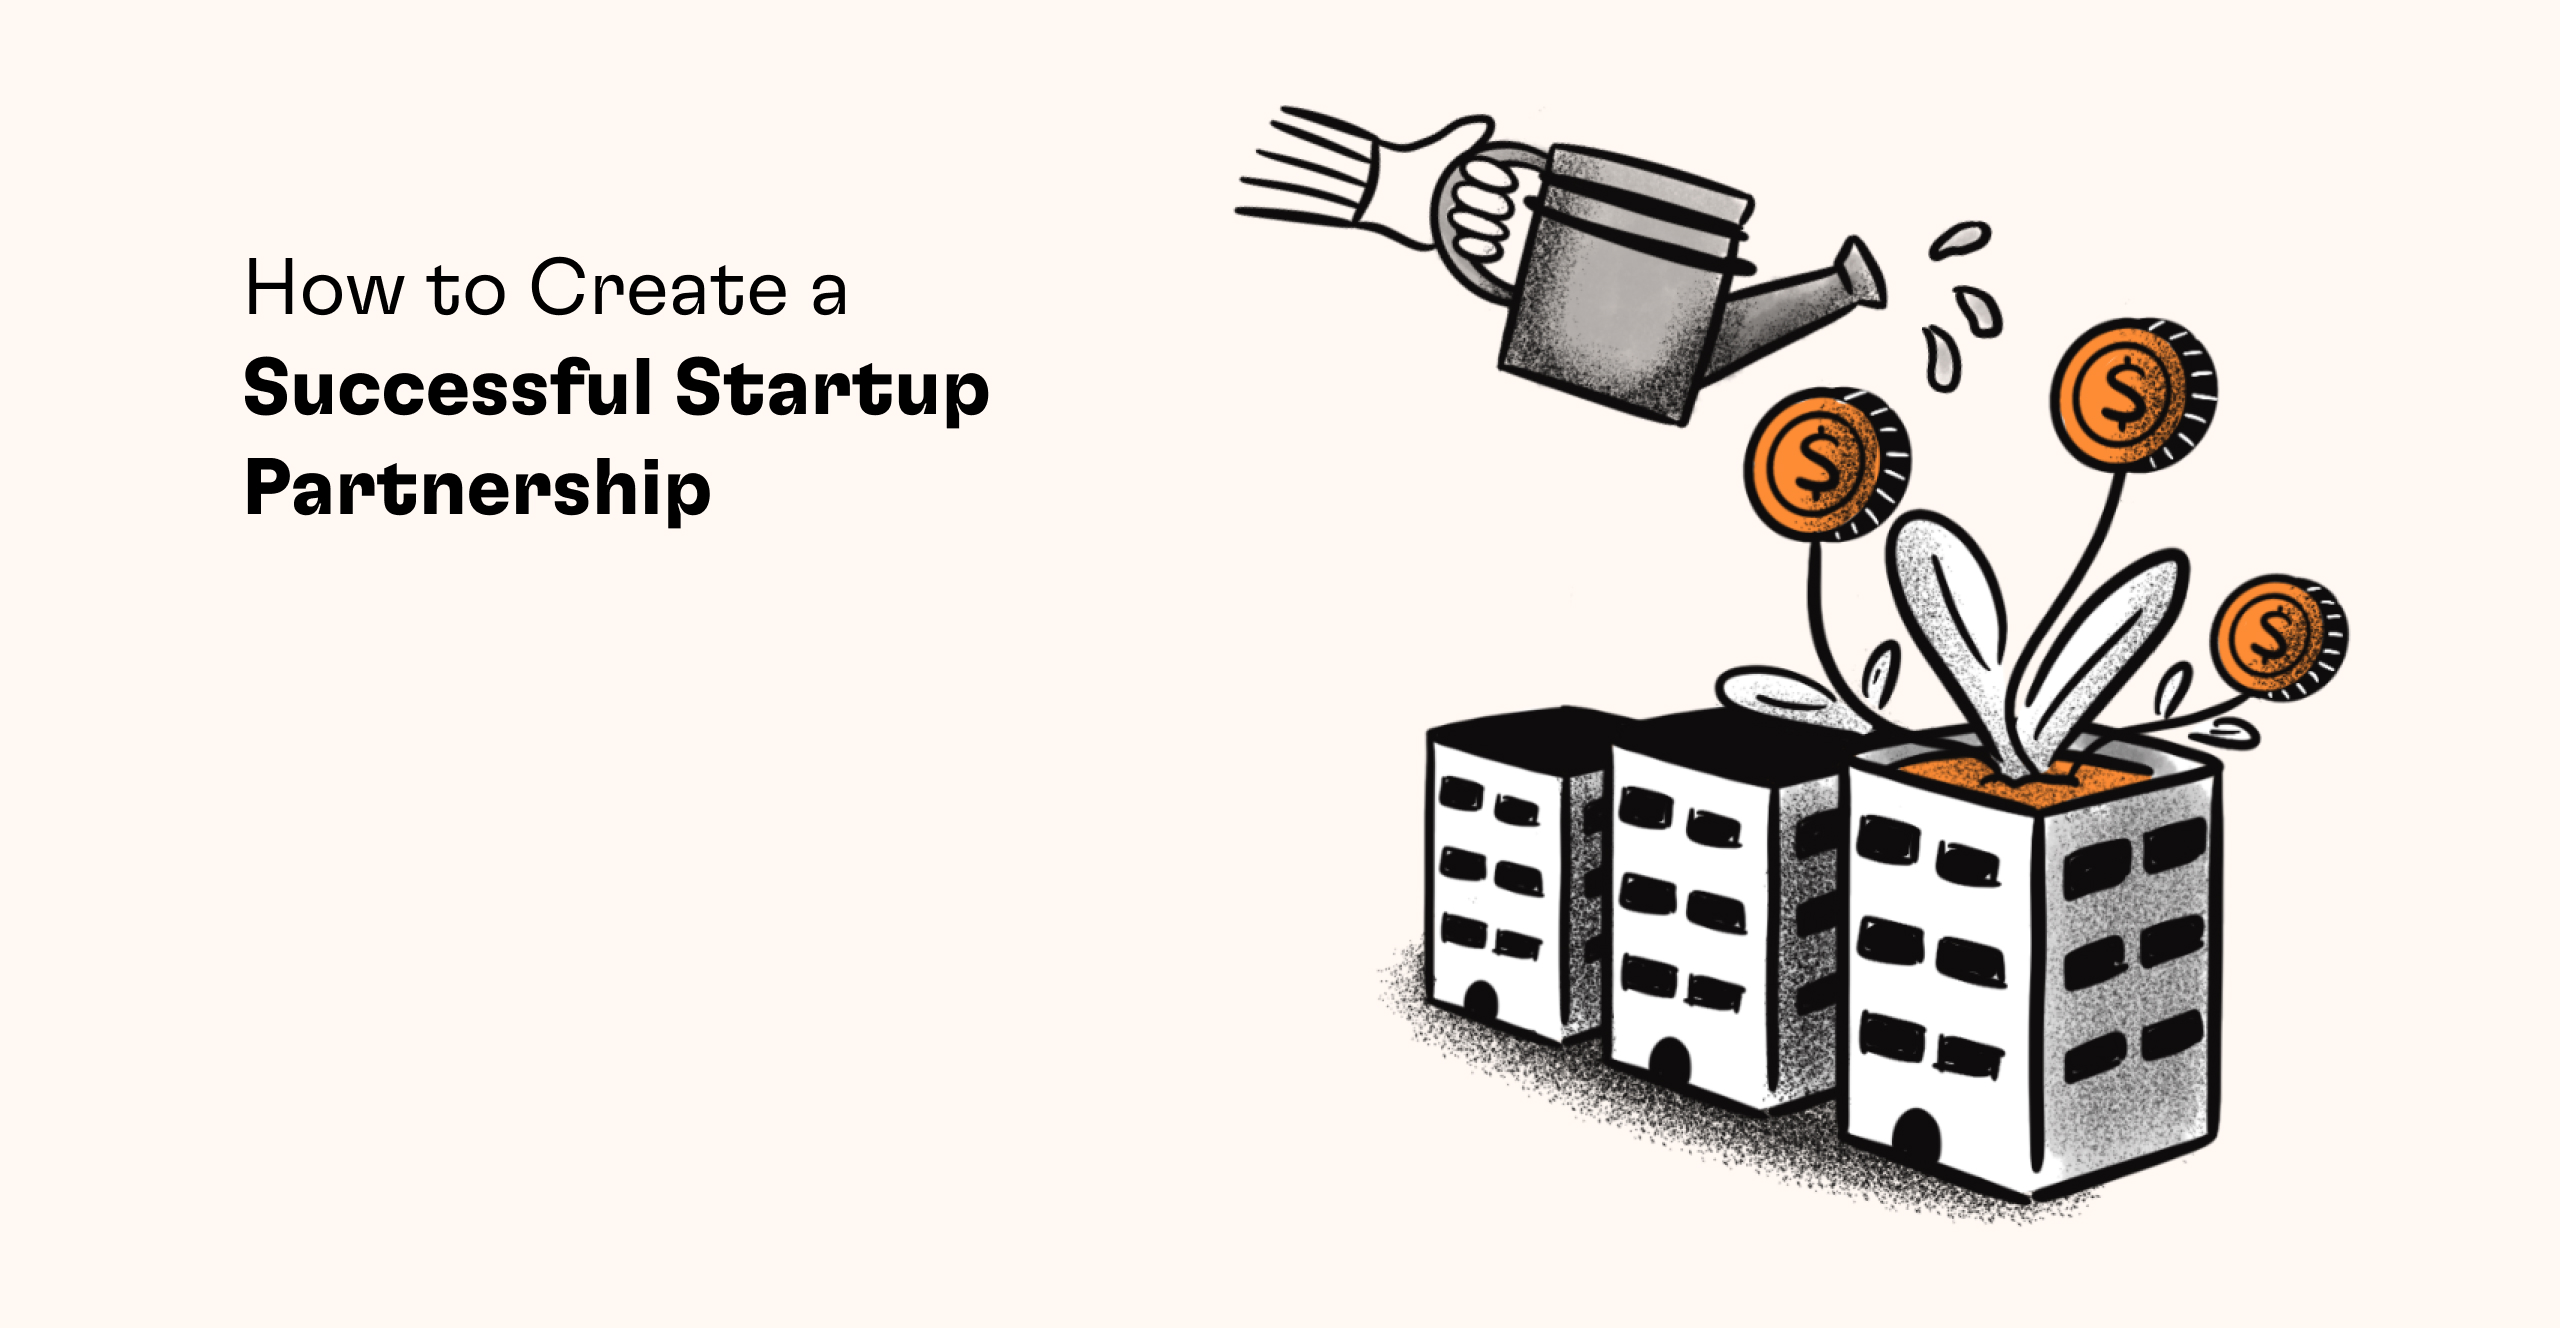 How to Create a Successful Startup Partnership